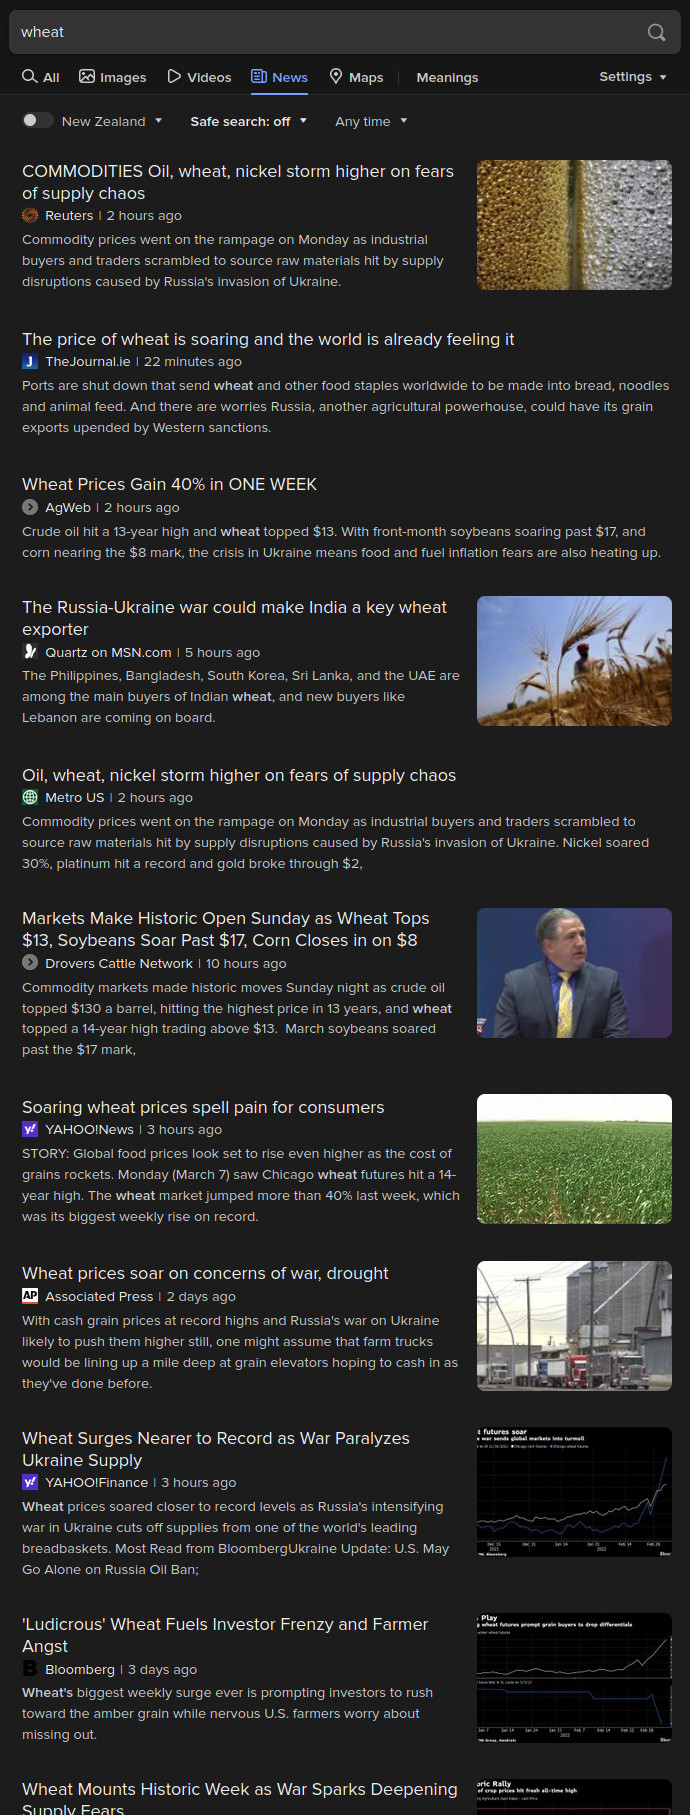 Current news cycle on wheat